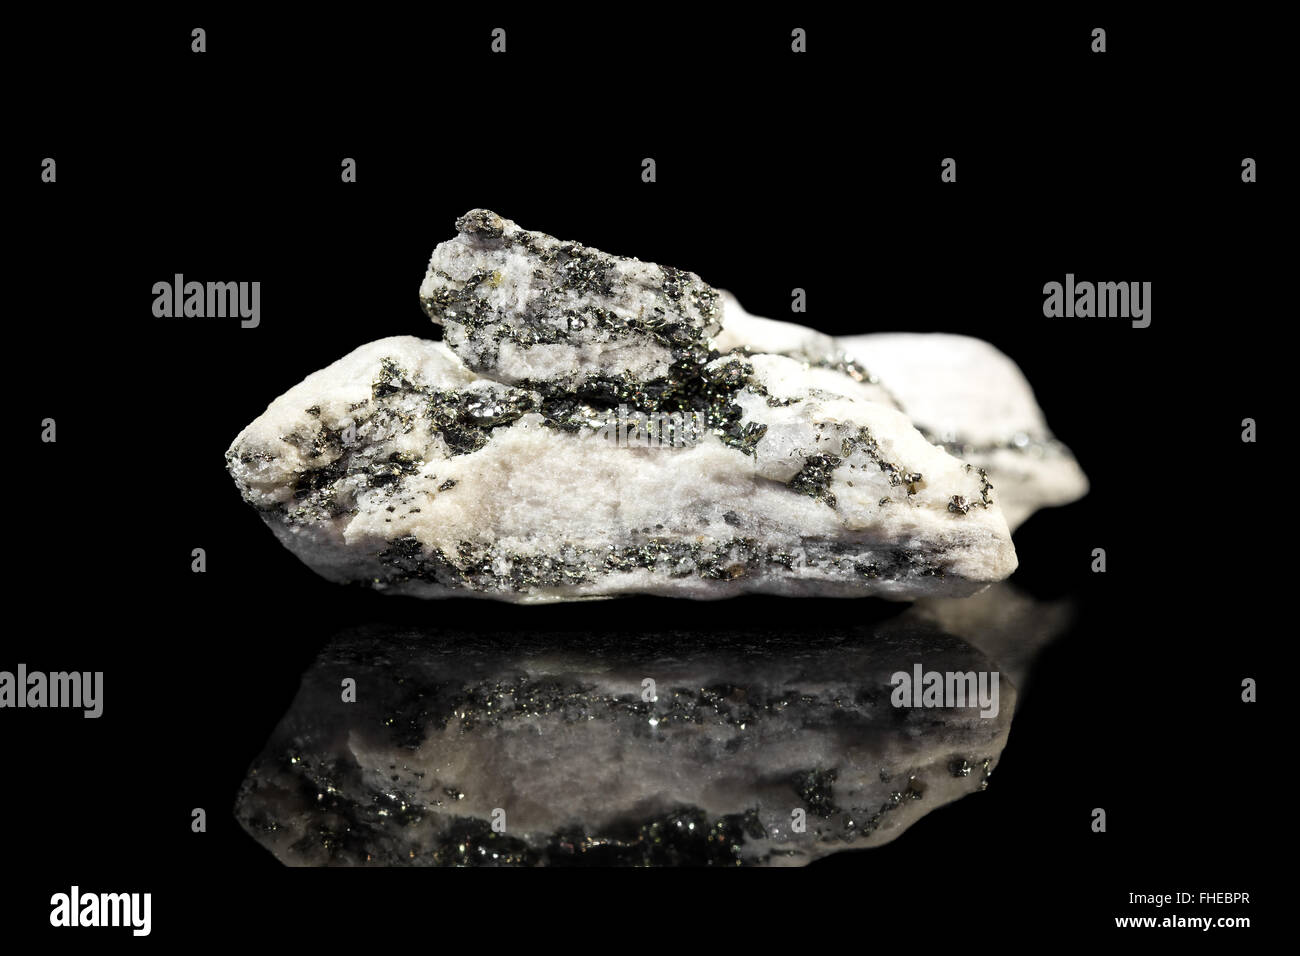 white dolomite mineral stone with pyrite, gemstone with reflections, black background Stock Photo